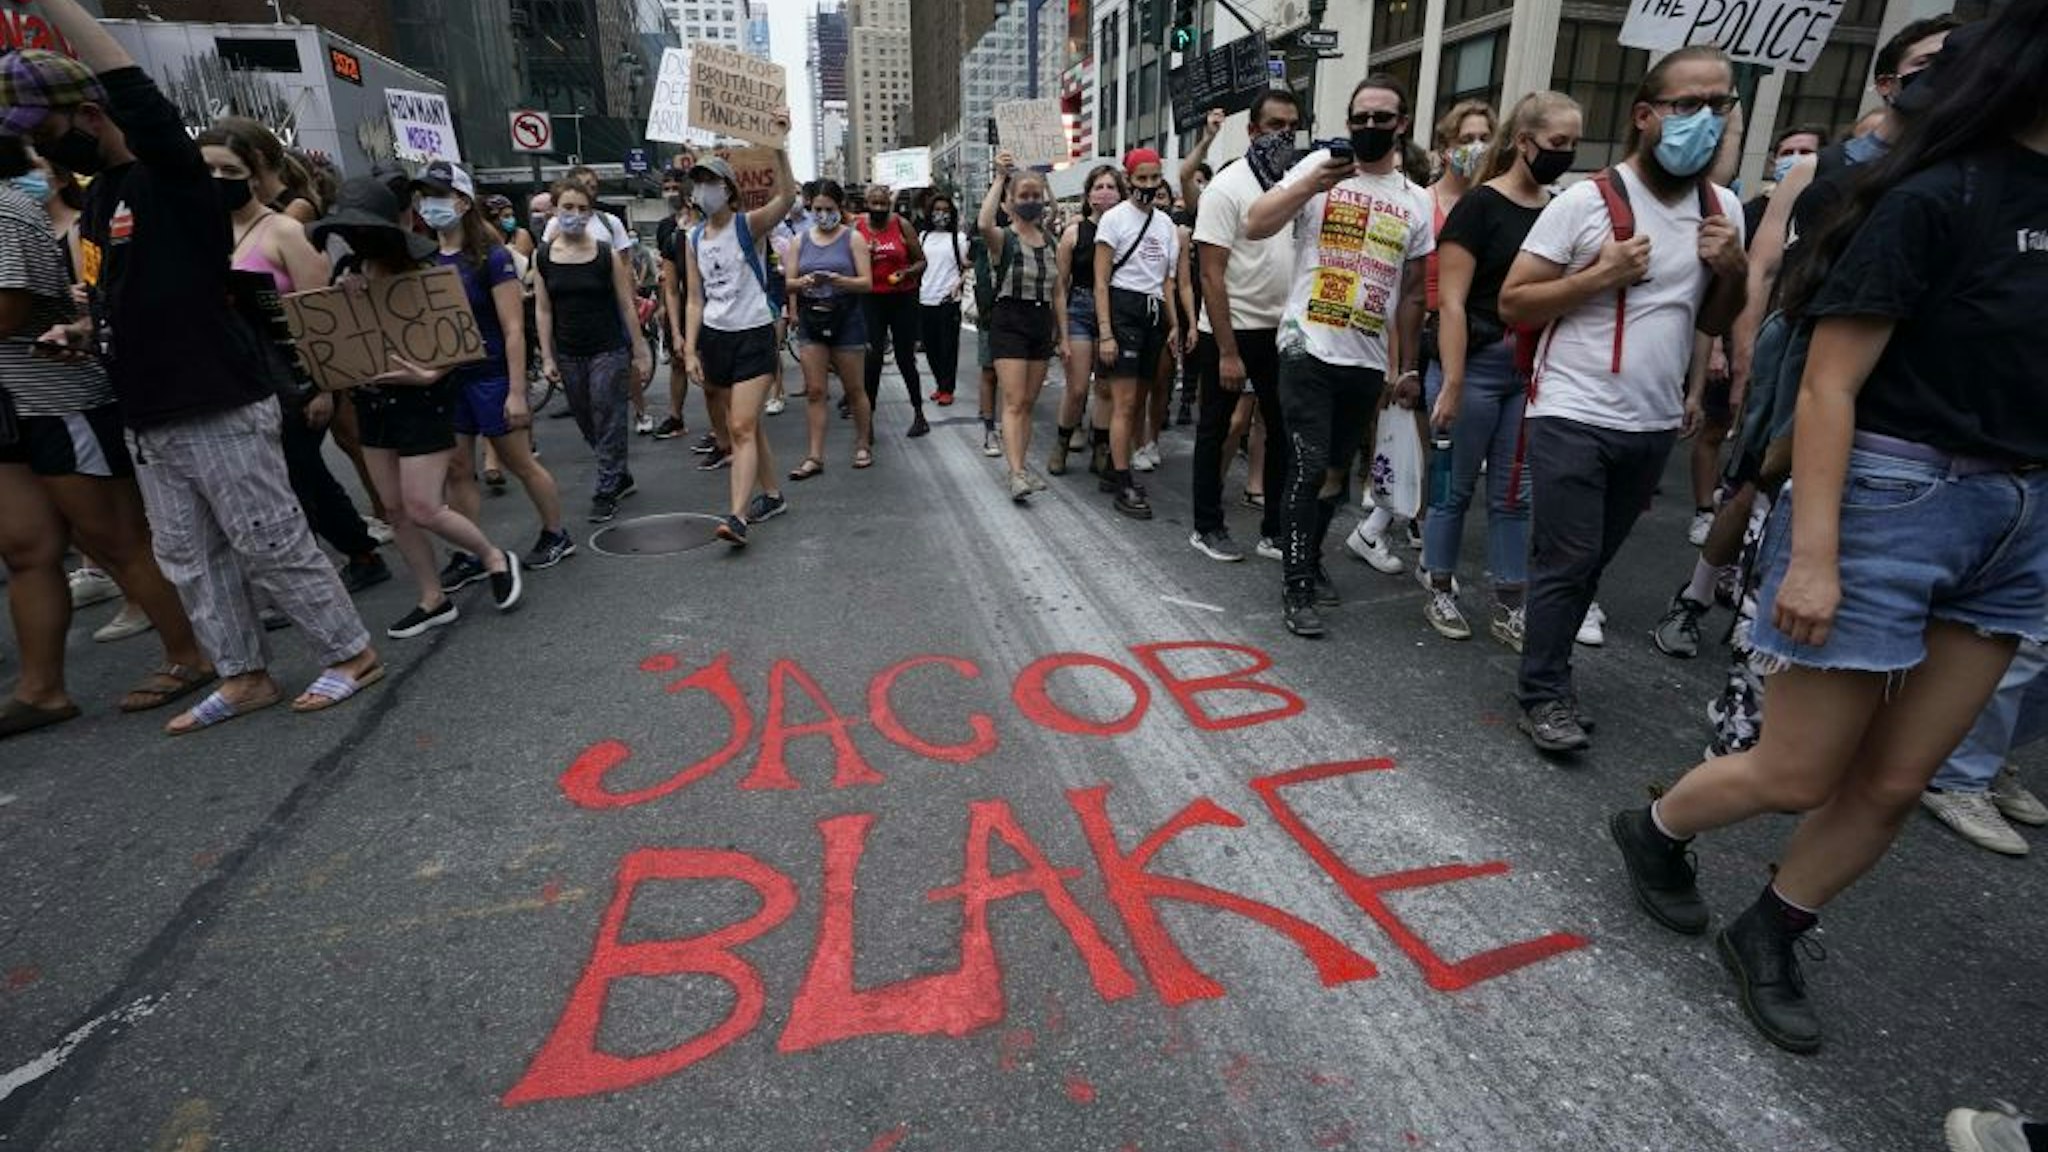 TOPSHOT - Demonstrators march through the city during a protest in New York August 24, 2020 against the shooting of Jacob Blake who shot in the back multiple times by police in Kenosha, Wisconsin, on Sunday, prompting community protests. - A video showing Wisconsin police shooting a black man in the back in front of his children sparked outrage across the United States on Monday, with officials calling in the national guard as they girded for a second night of violent protests. (Photo by TIMOTHY A. CLARY / AFP) (Photo by TIMOTHY A. CLARY/AFP via Getty Images)